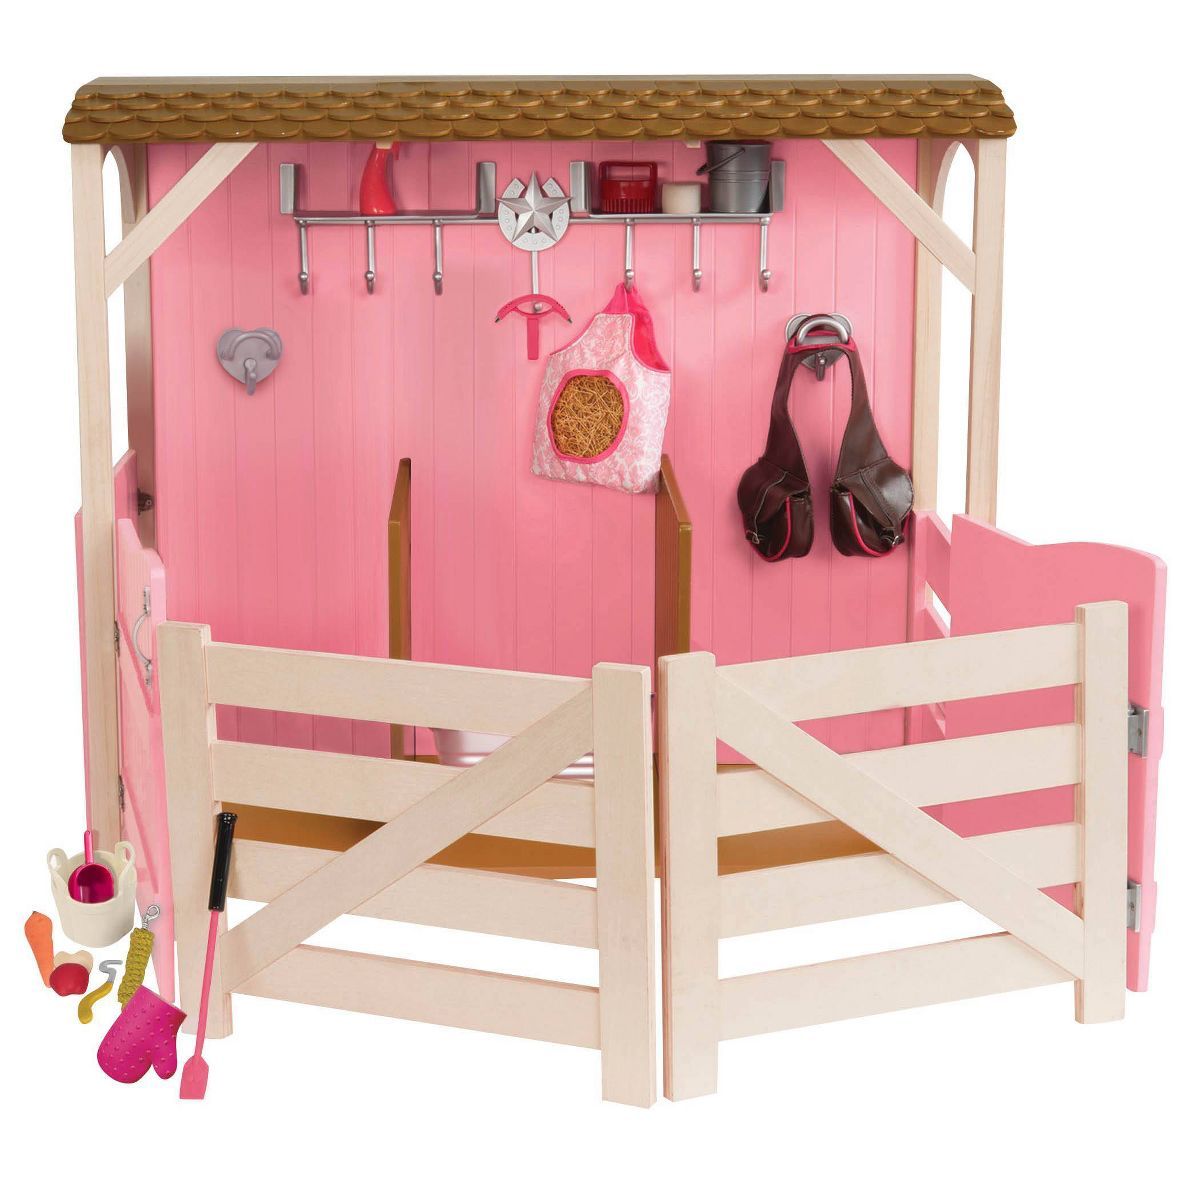 Our Generation Horse Barn Playset for 18" Dolls - Saddle Up Stables - Pink | Target